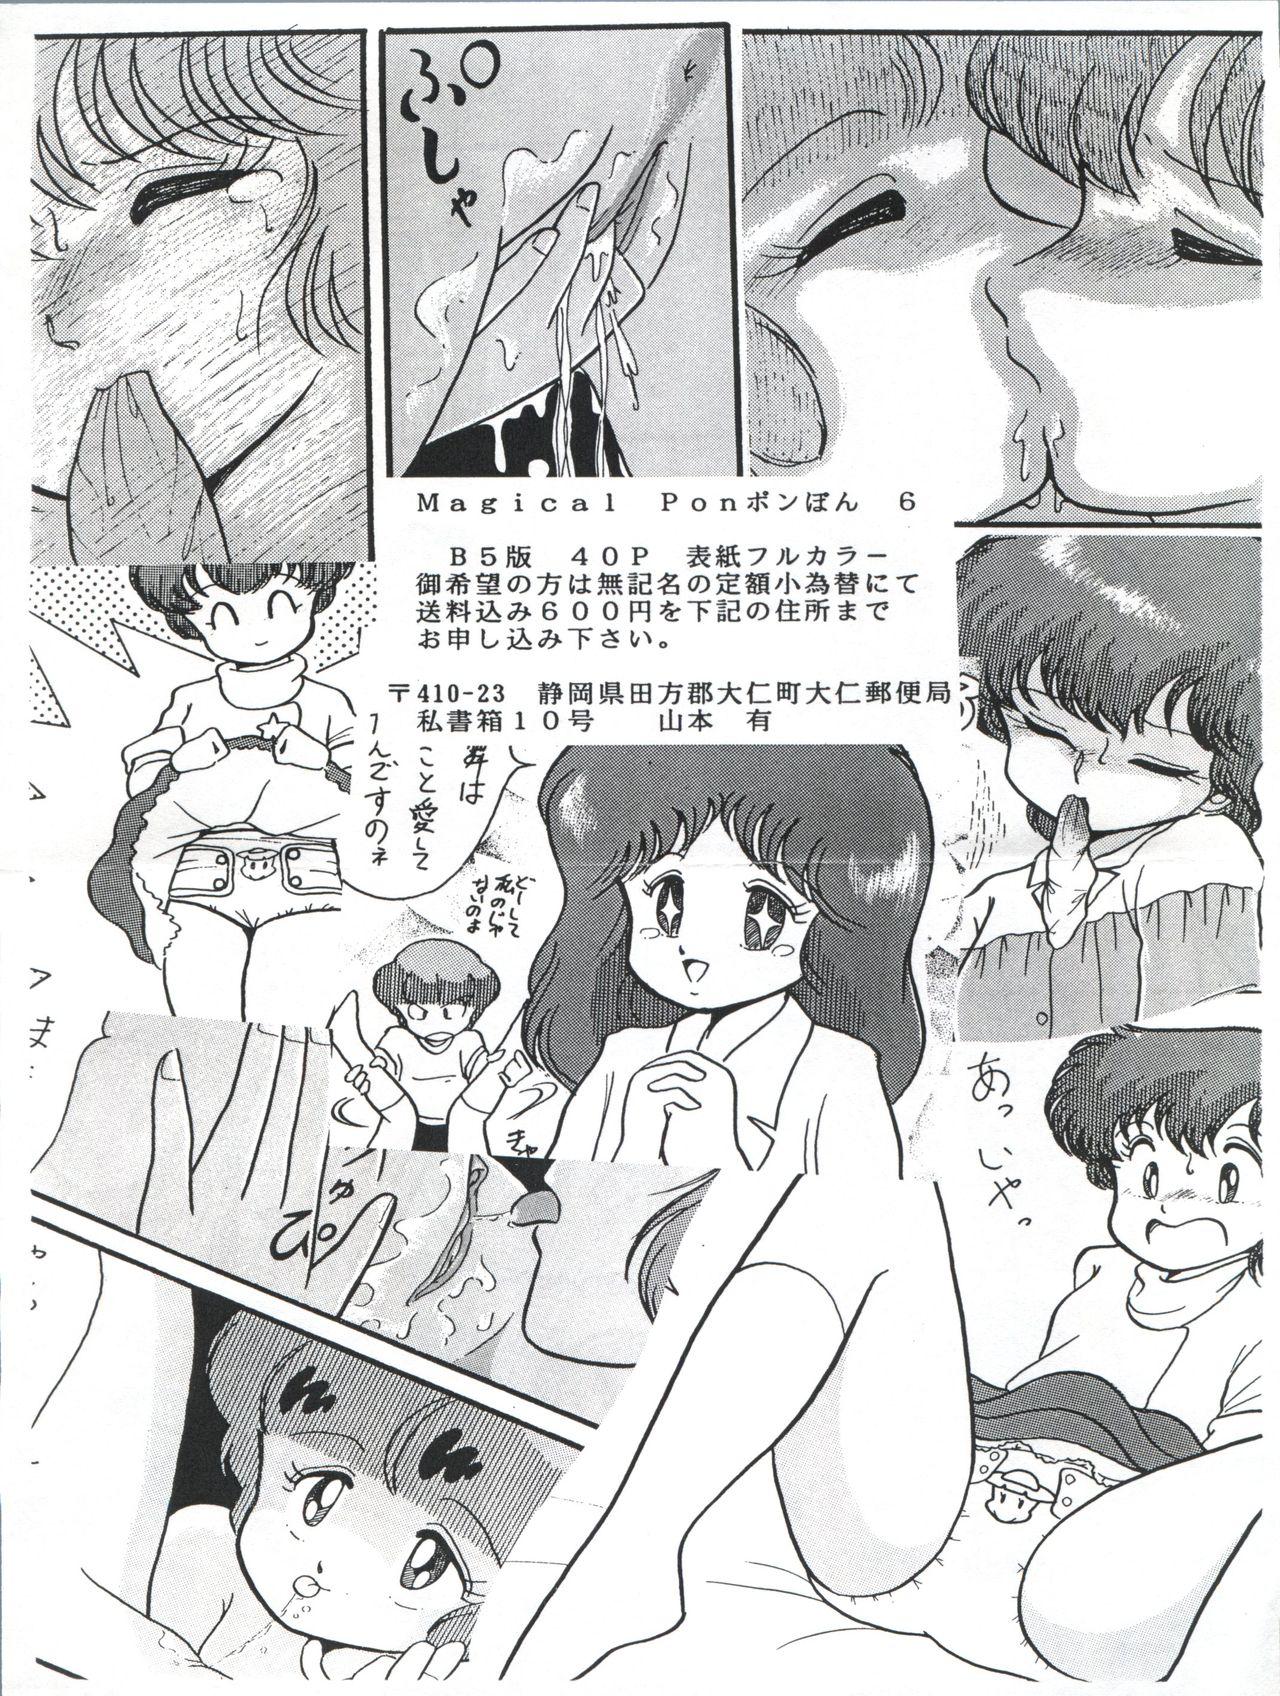 Girlfriends Magical Ponponpon 5 - Magical emi Creamy mami Kimagure orange road Mahou no yousei persia Gall force Model - Page 54